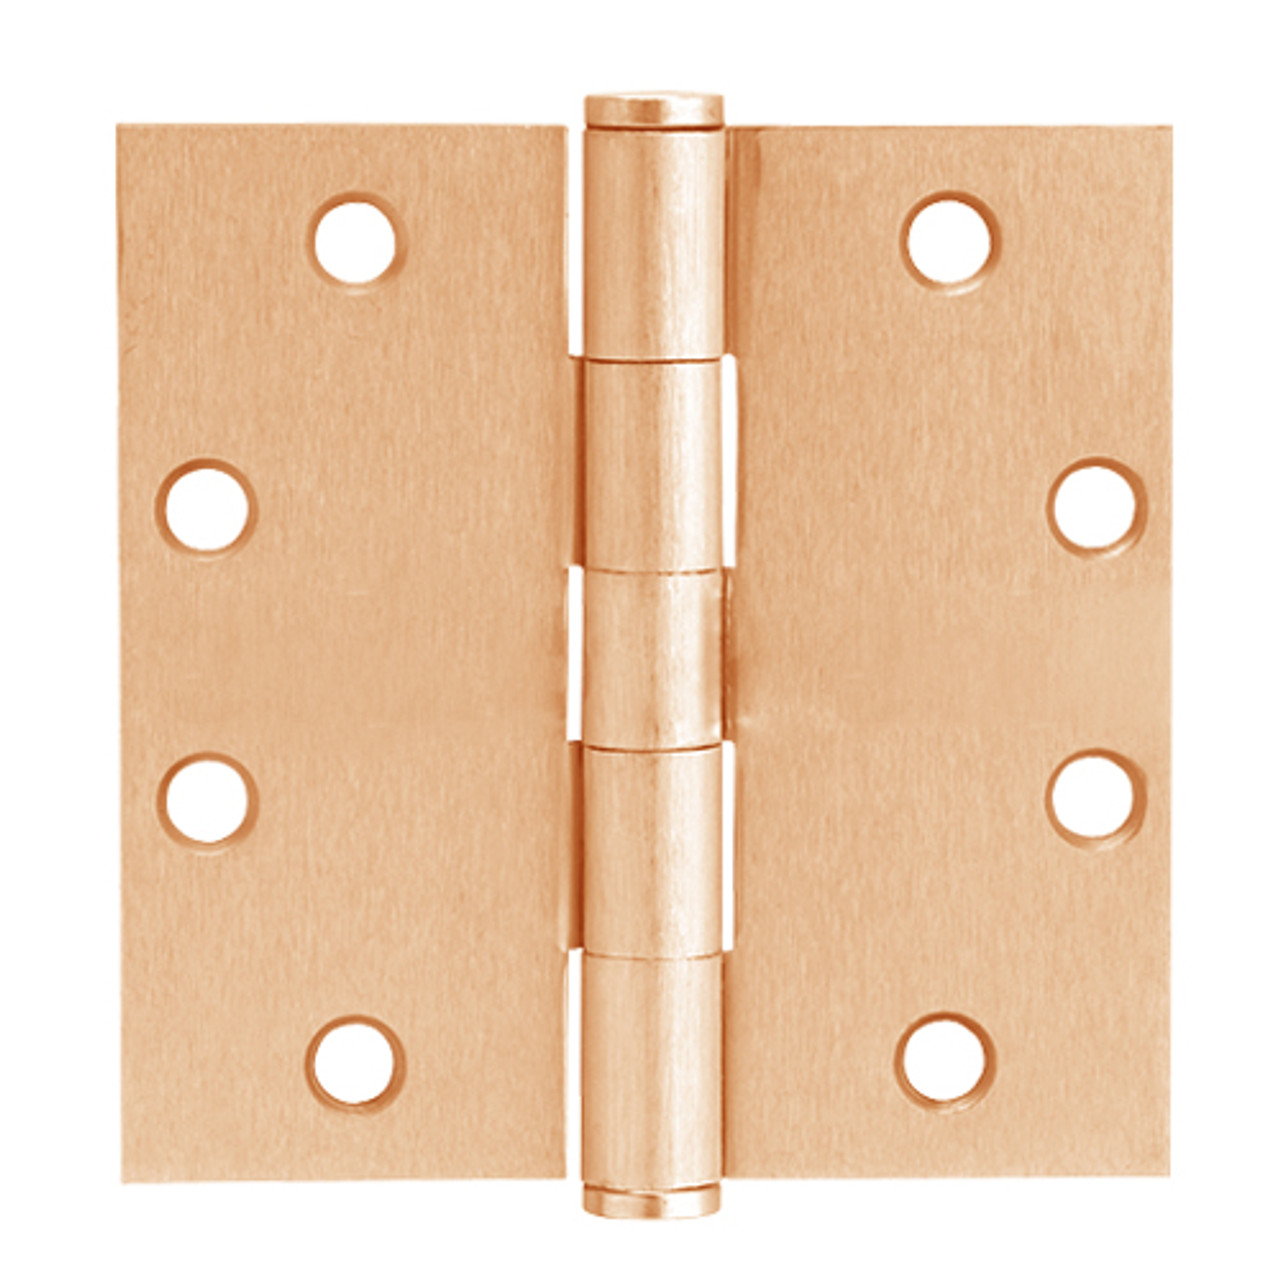 5PB1-4x4-639 IVES 5 Knuckle Plain Bearing Full Mortise Hinge in Satin Bronze Plated